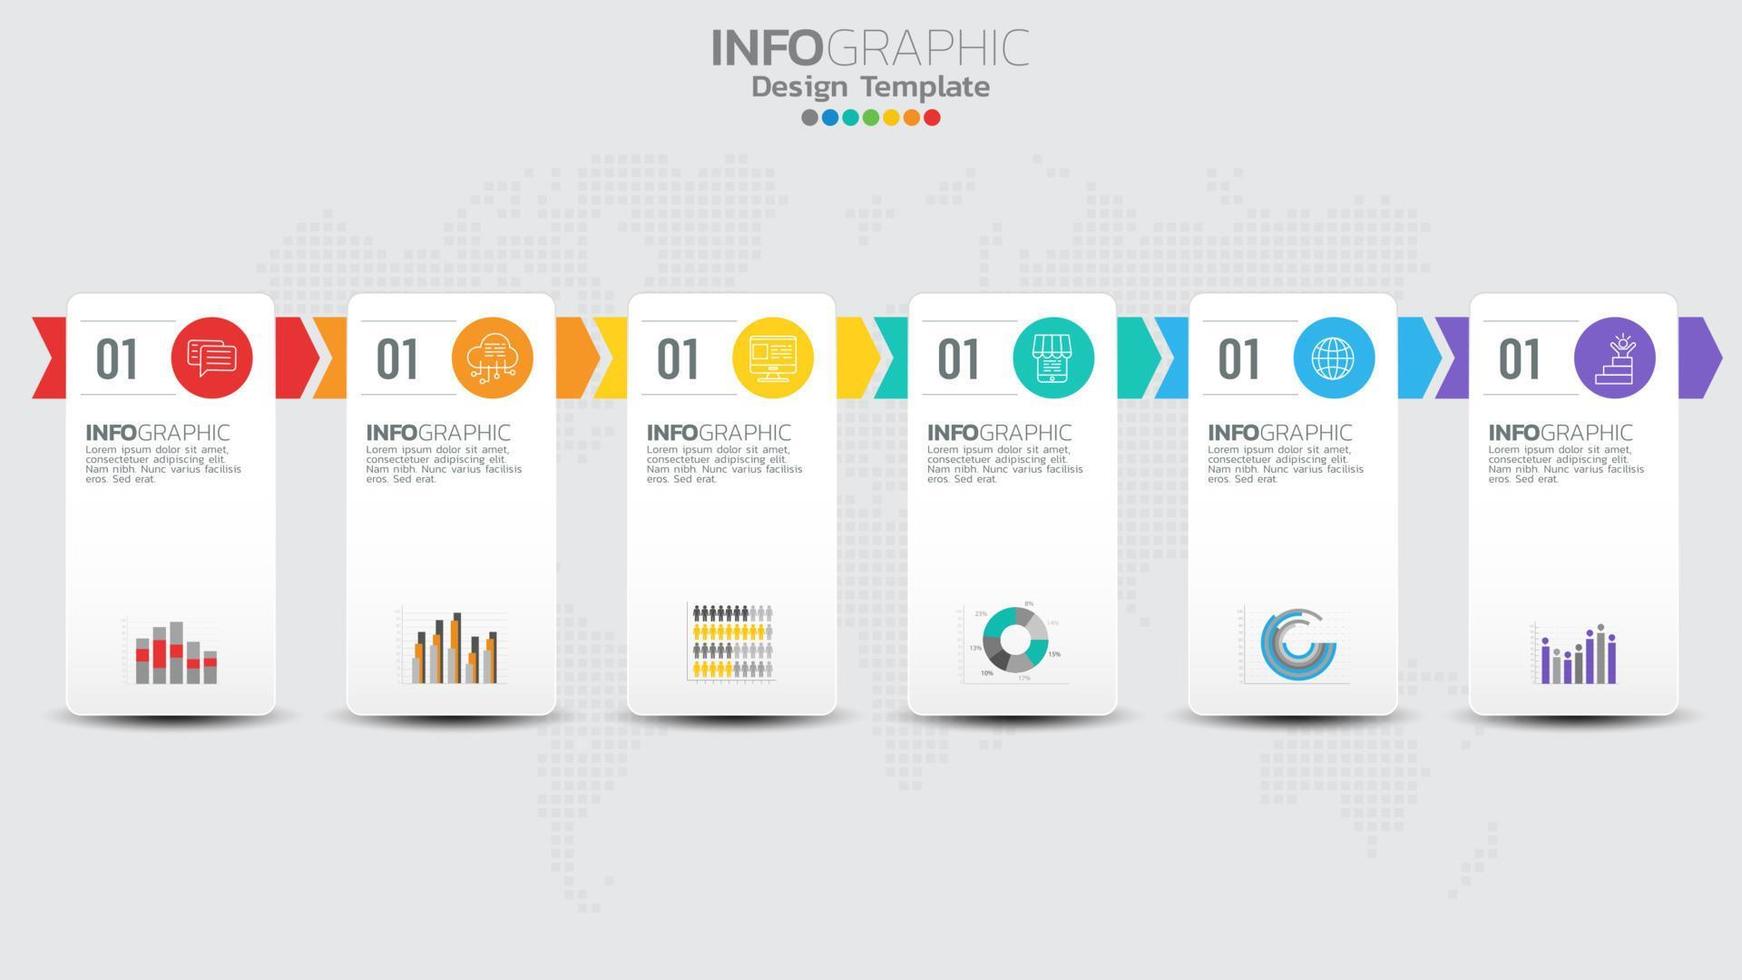 Timeline infographics template with 6 elements workflow process chart. vector